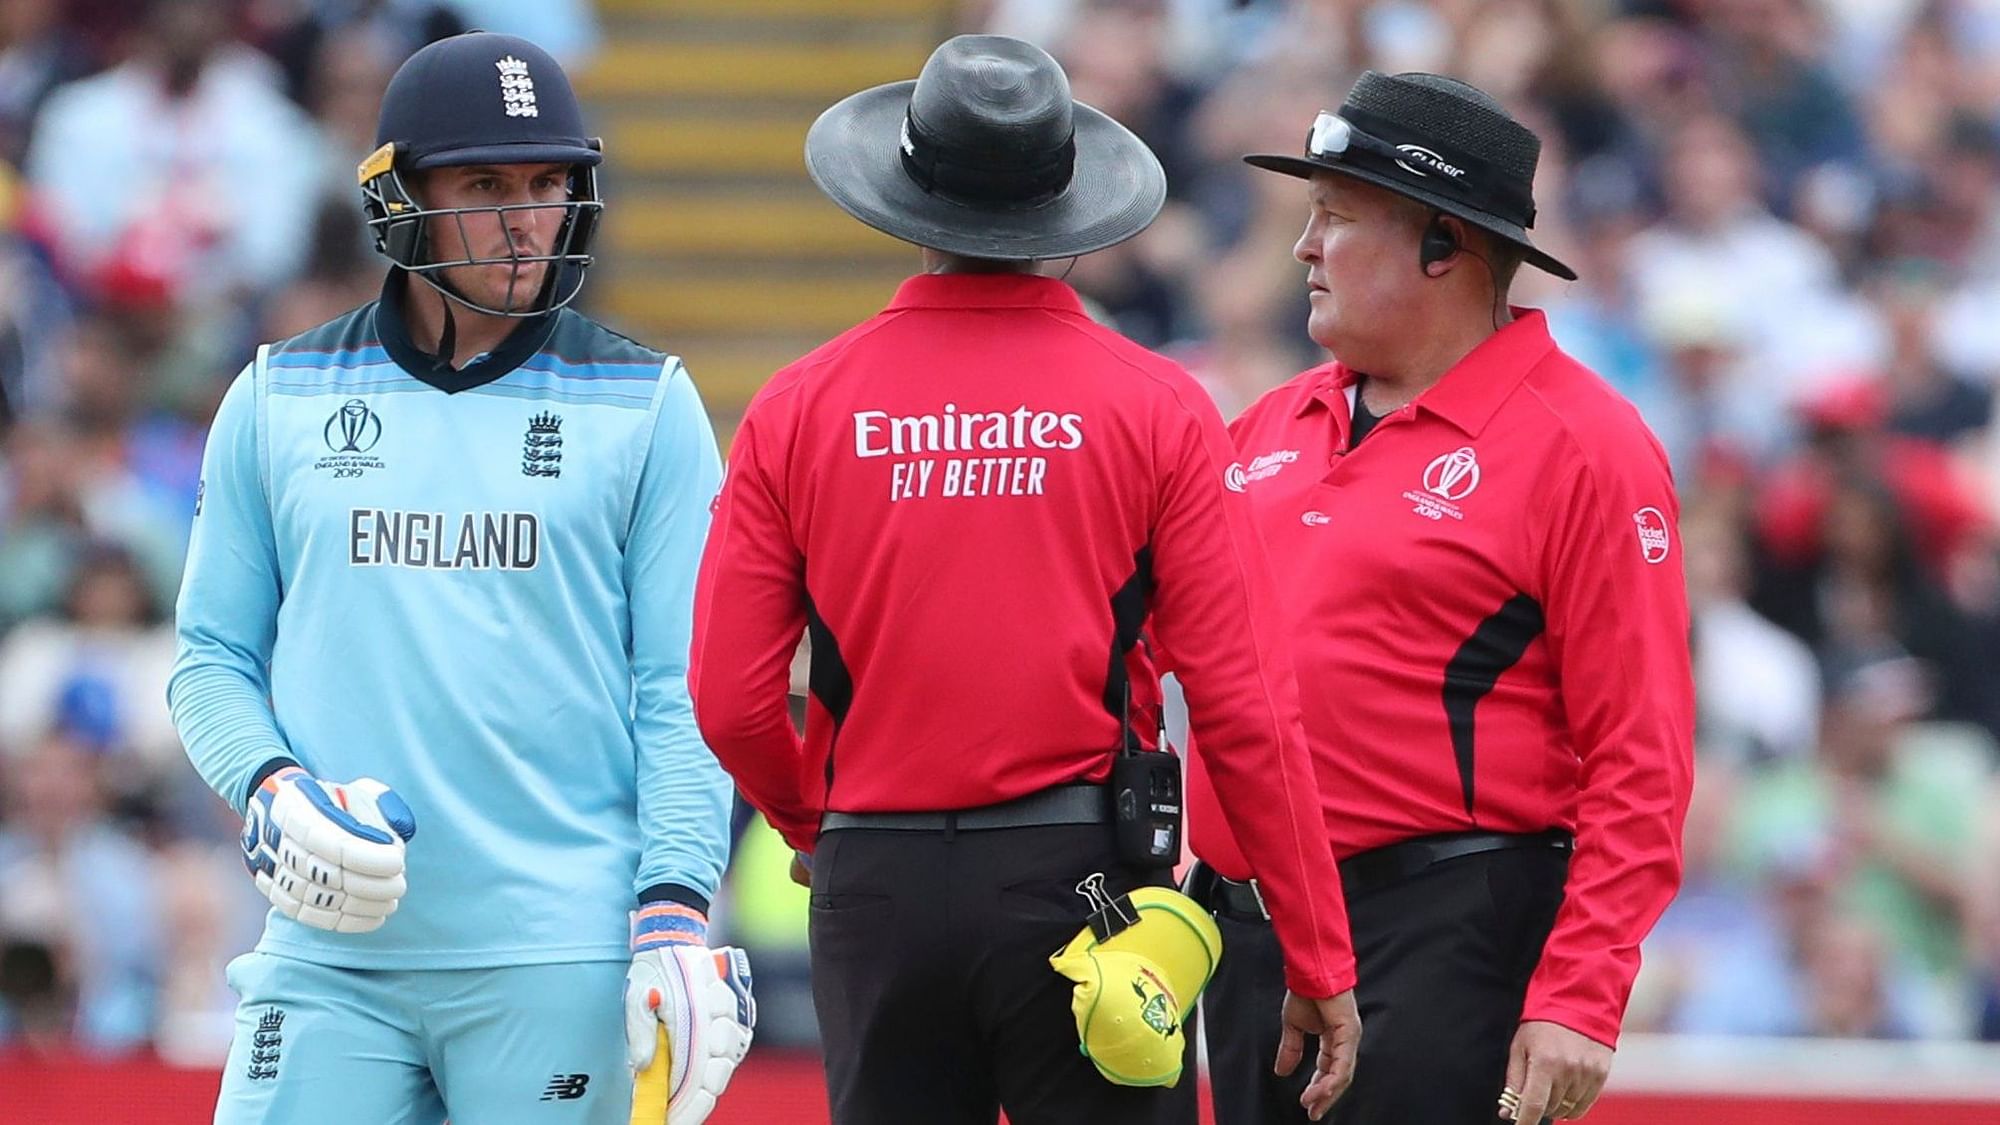 England’s Jason Roy, left, interacts with the umpires after he was given out during the Cricket World Cup semi-final match between England and Australia at Edgbaston in Birmingham, England, Thursday, July 11, 2019. 